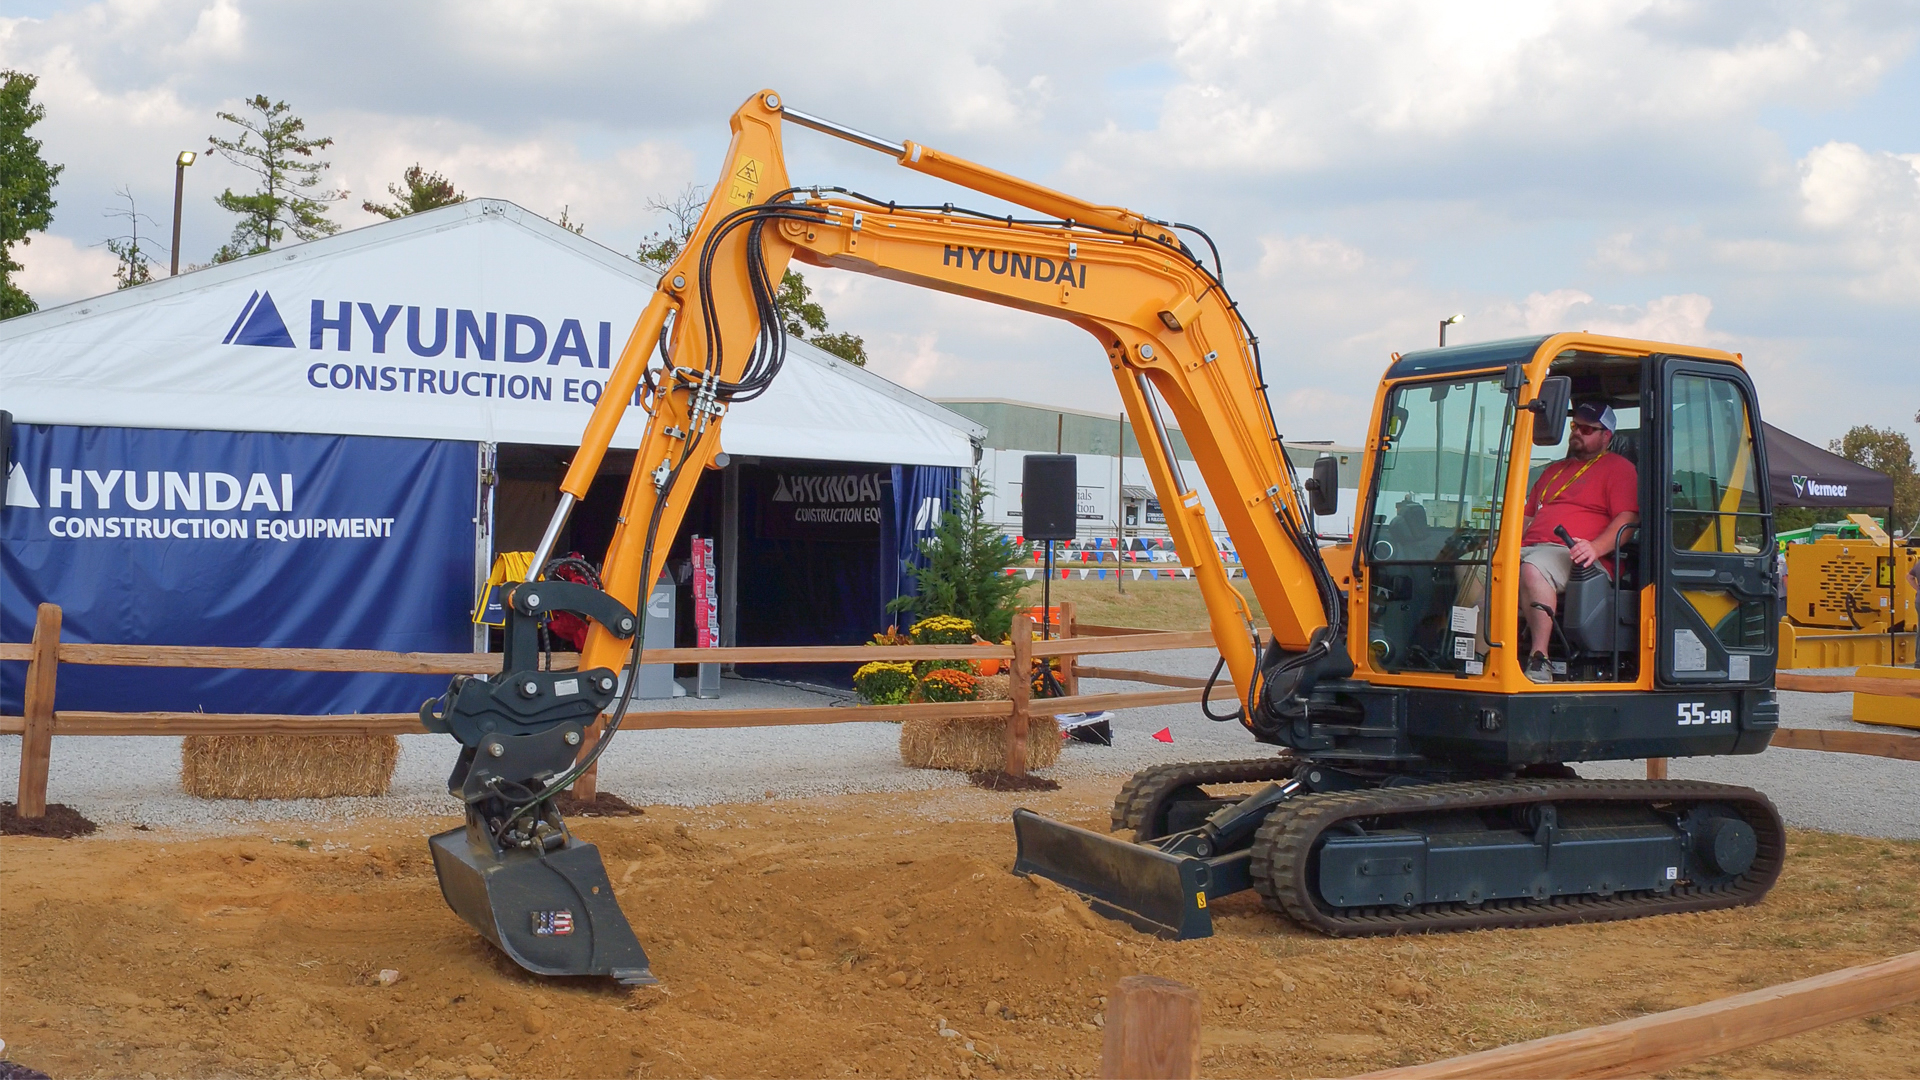 2021 Utility Expo Equipment Demo and YouTube Meet & Greet -Hyundai Gross sales position K341